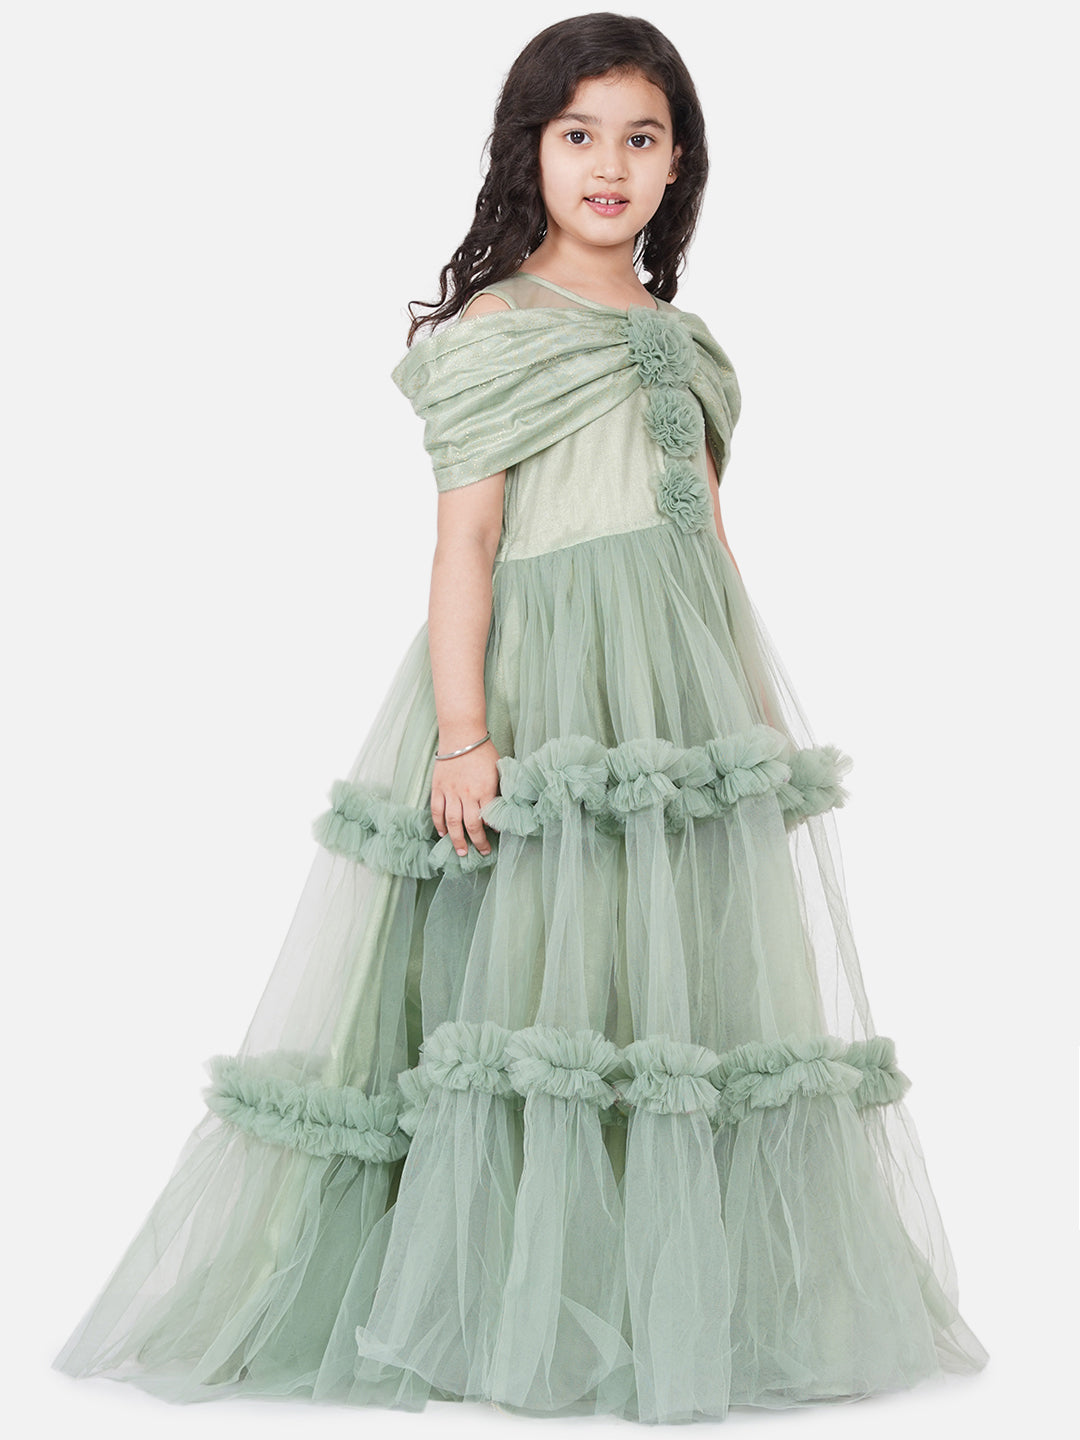 Green Jewel Neck Sleeveless Bows Tulle Cotton Sequined Kids Party Dresses | Girls  dresses, Green flower girl dresses, Kids party dresses